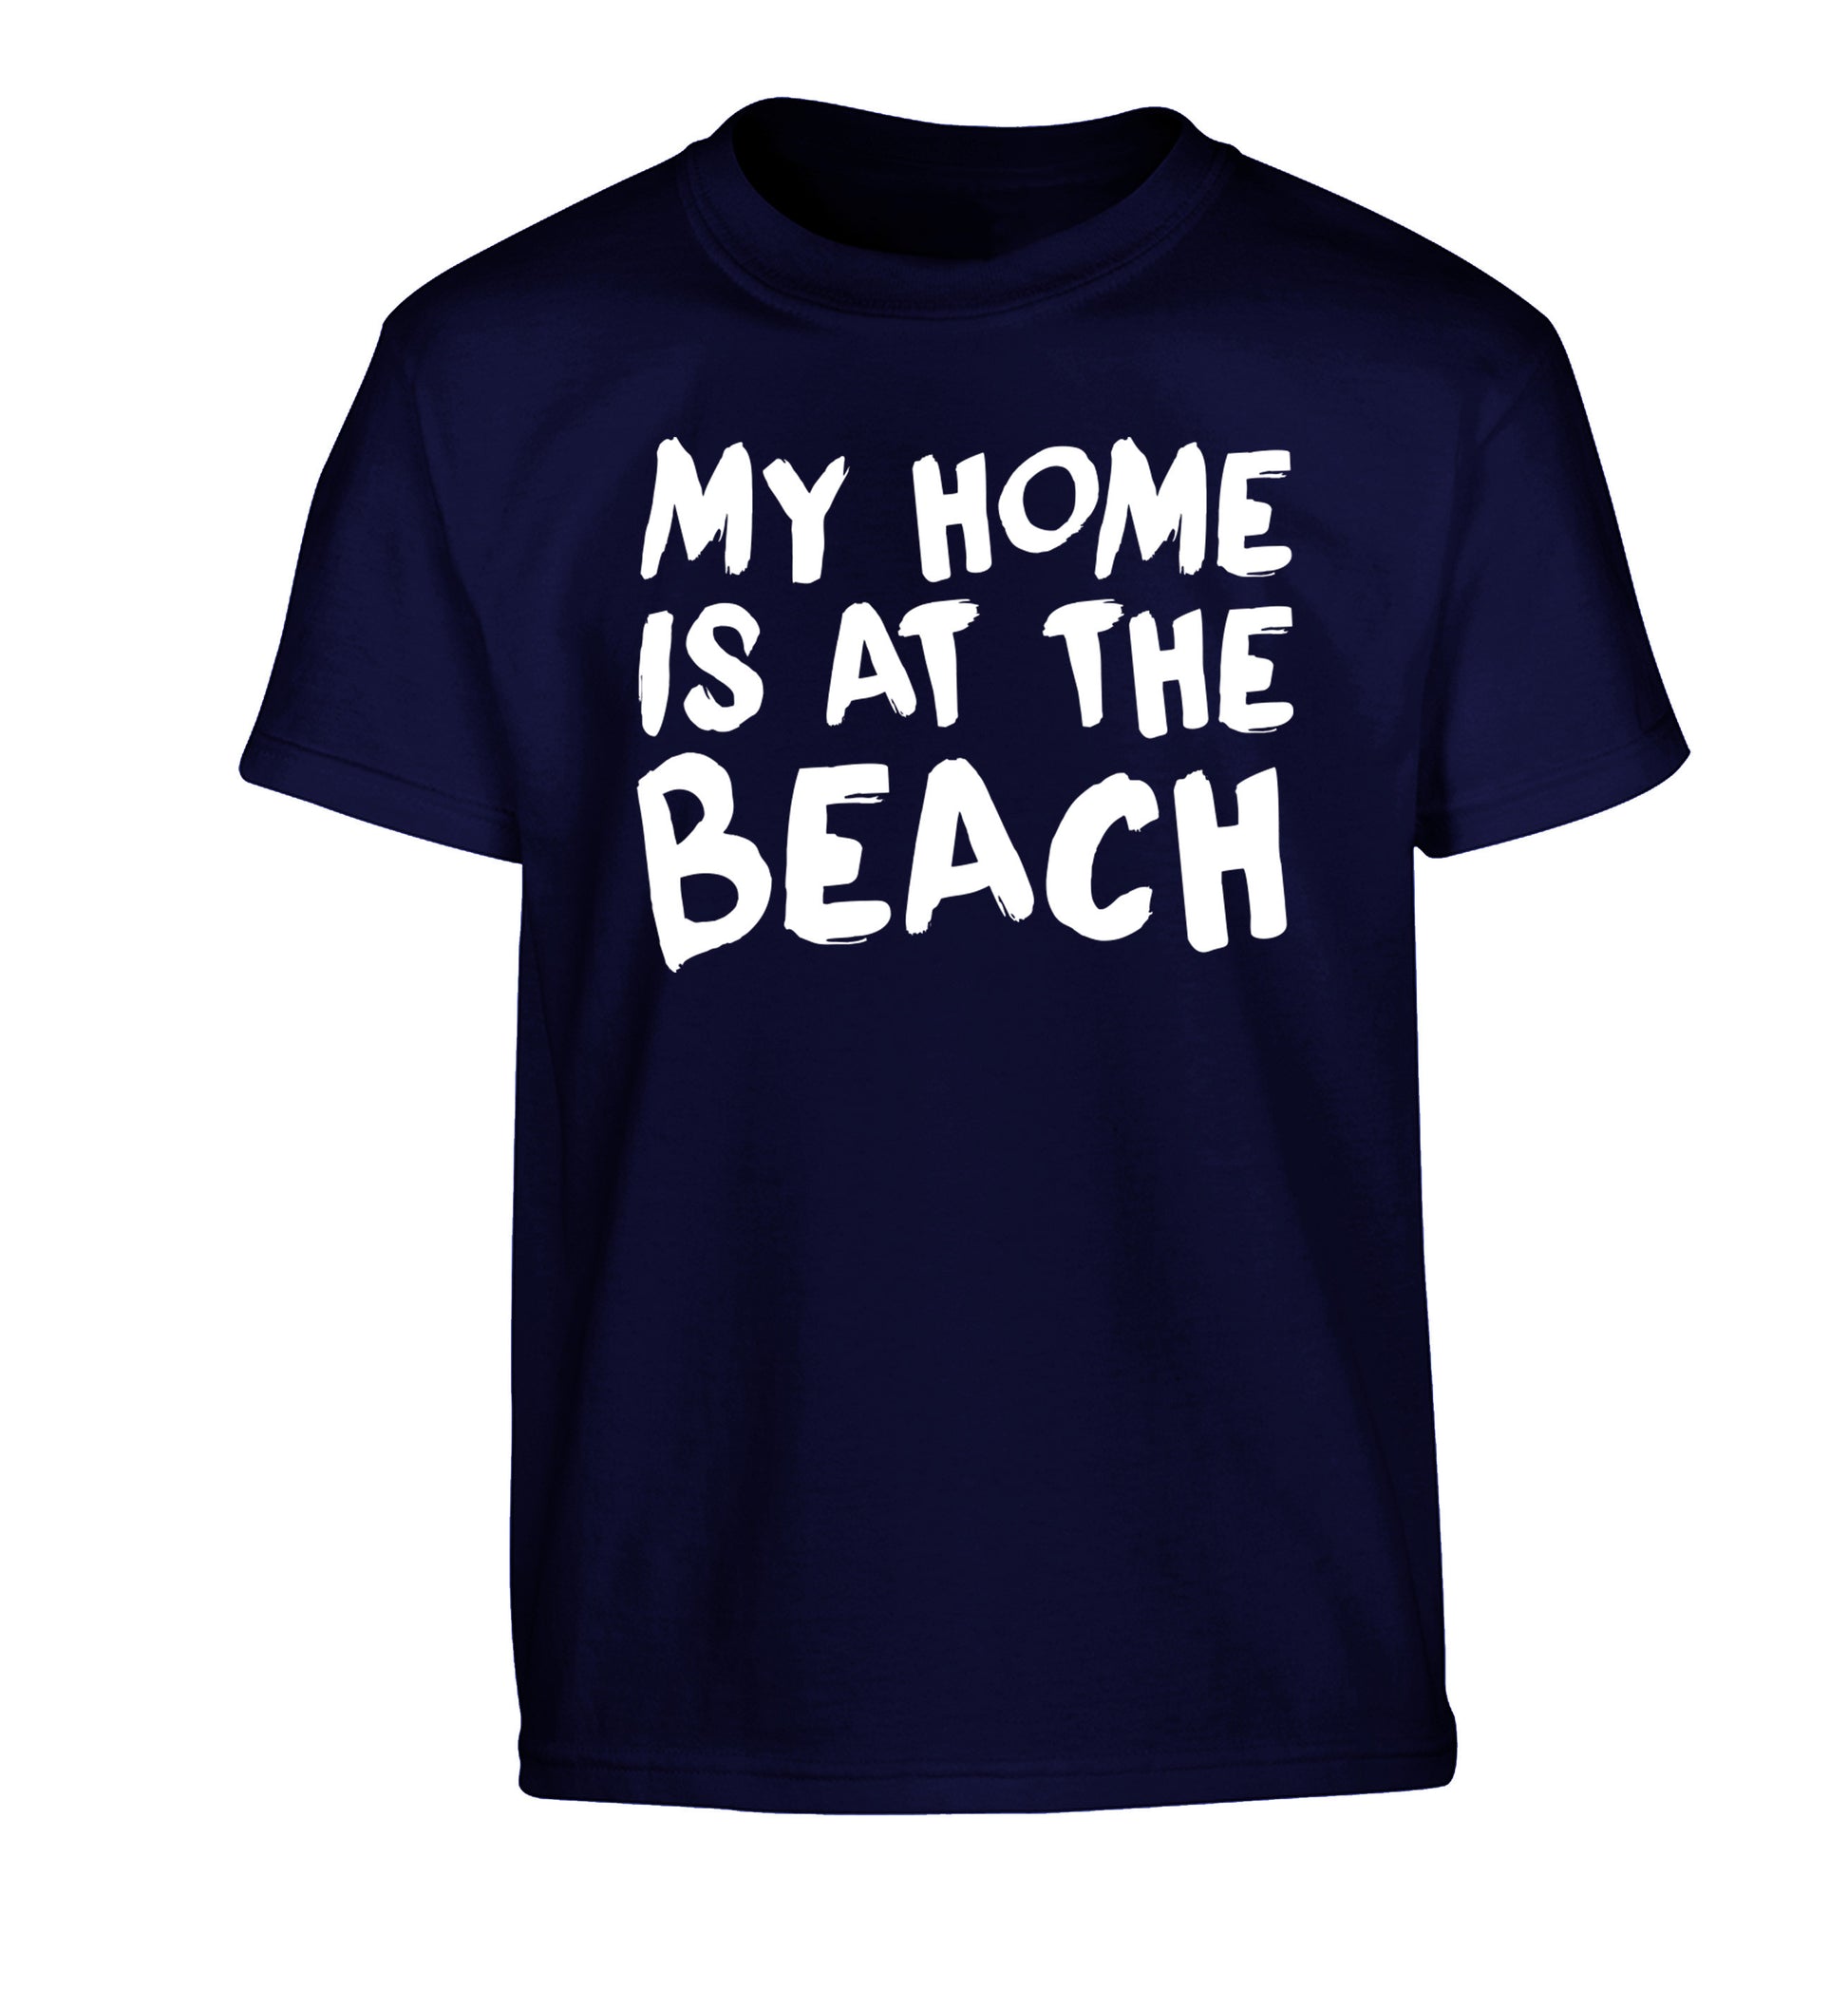 My home is at the beach Children's navy Tshirt 12-14 Years